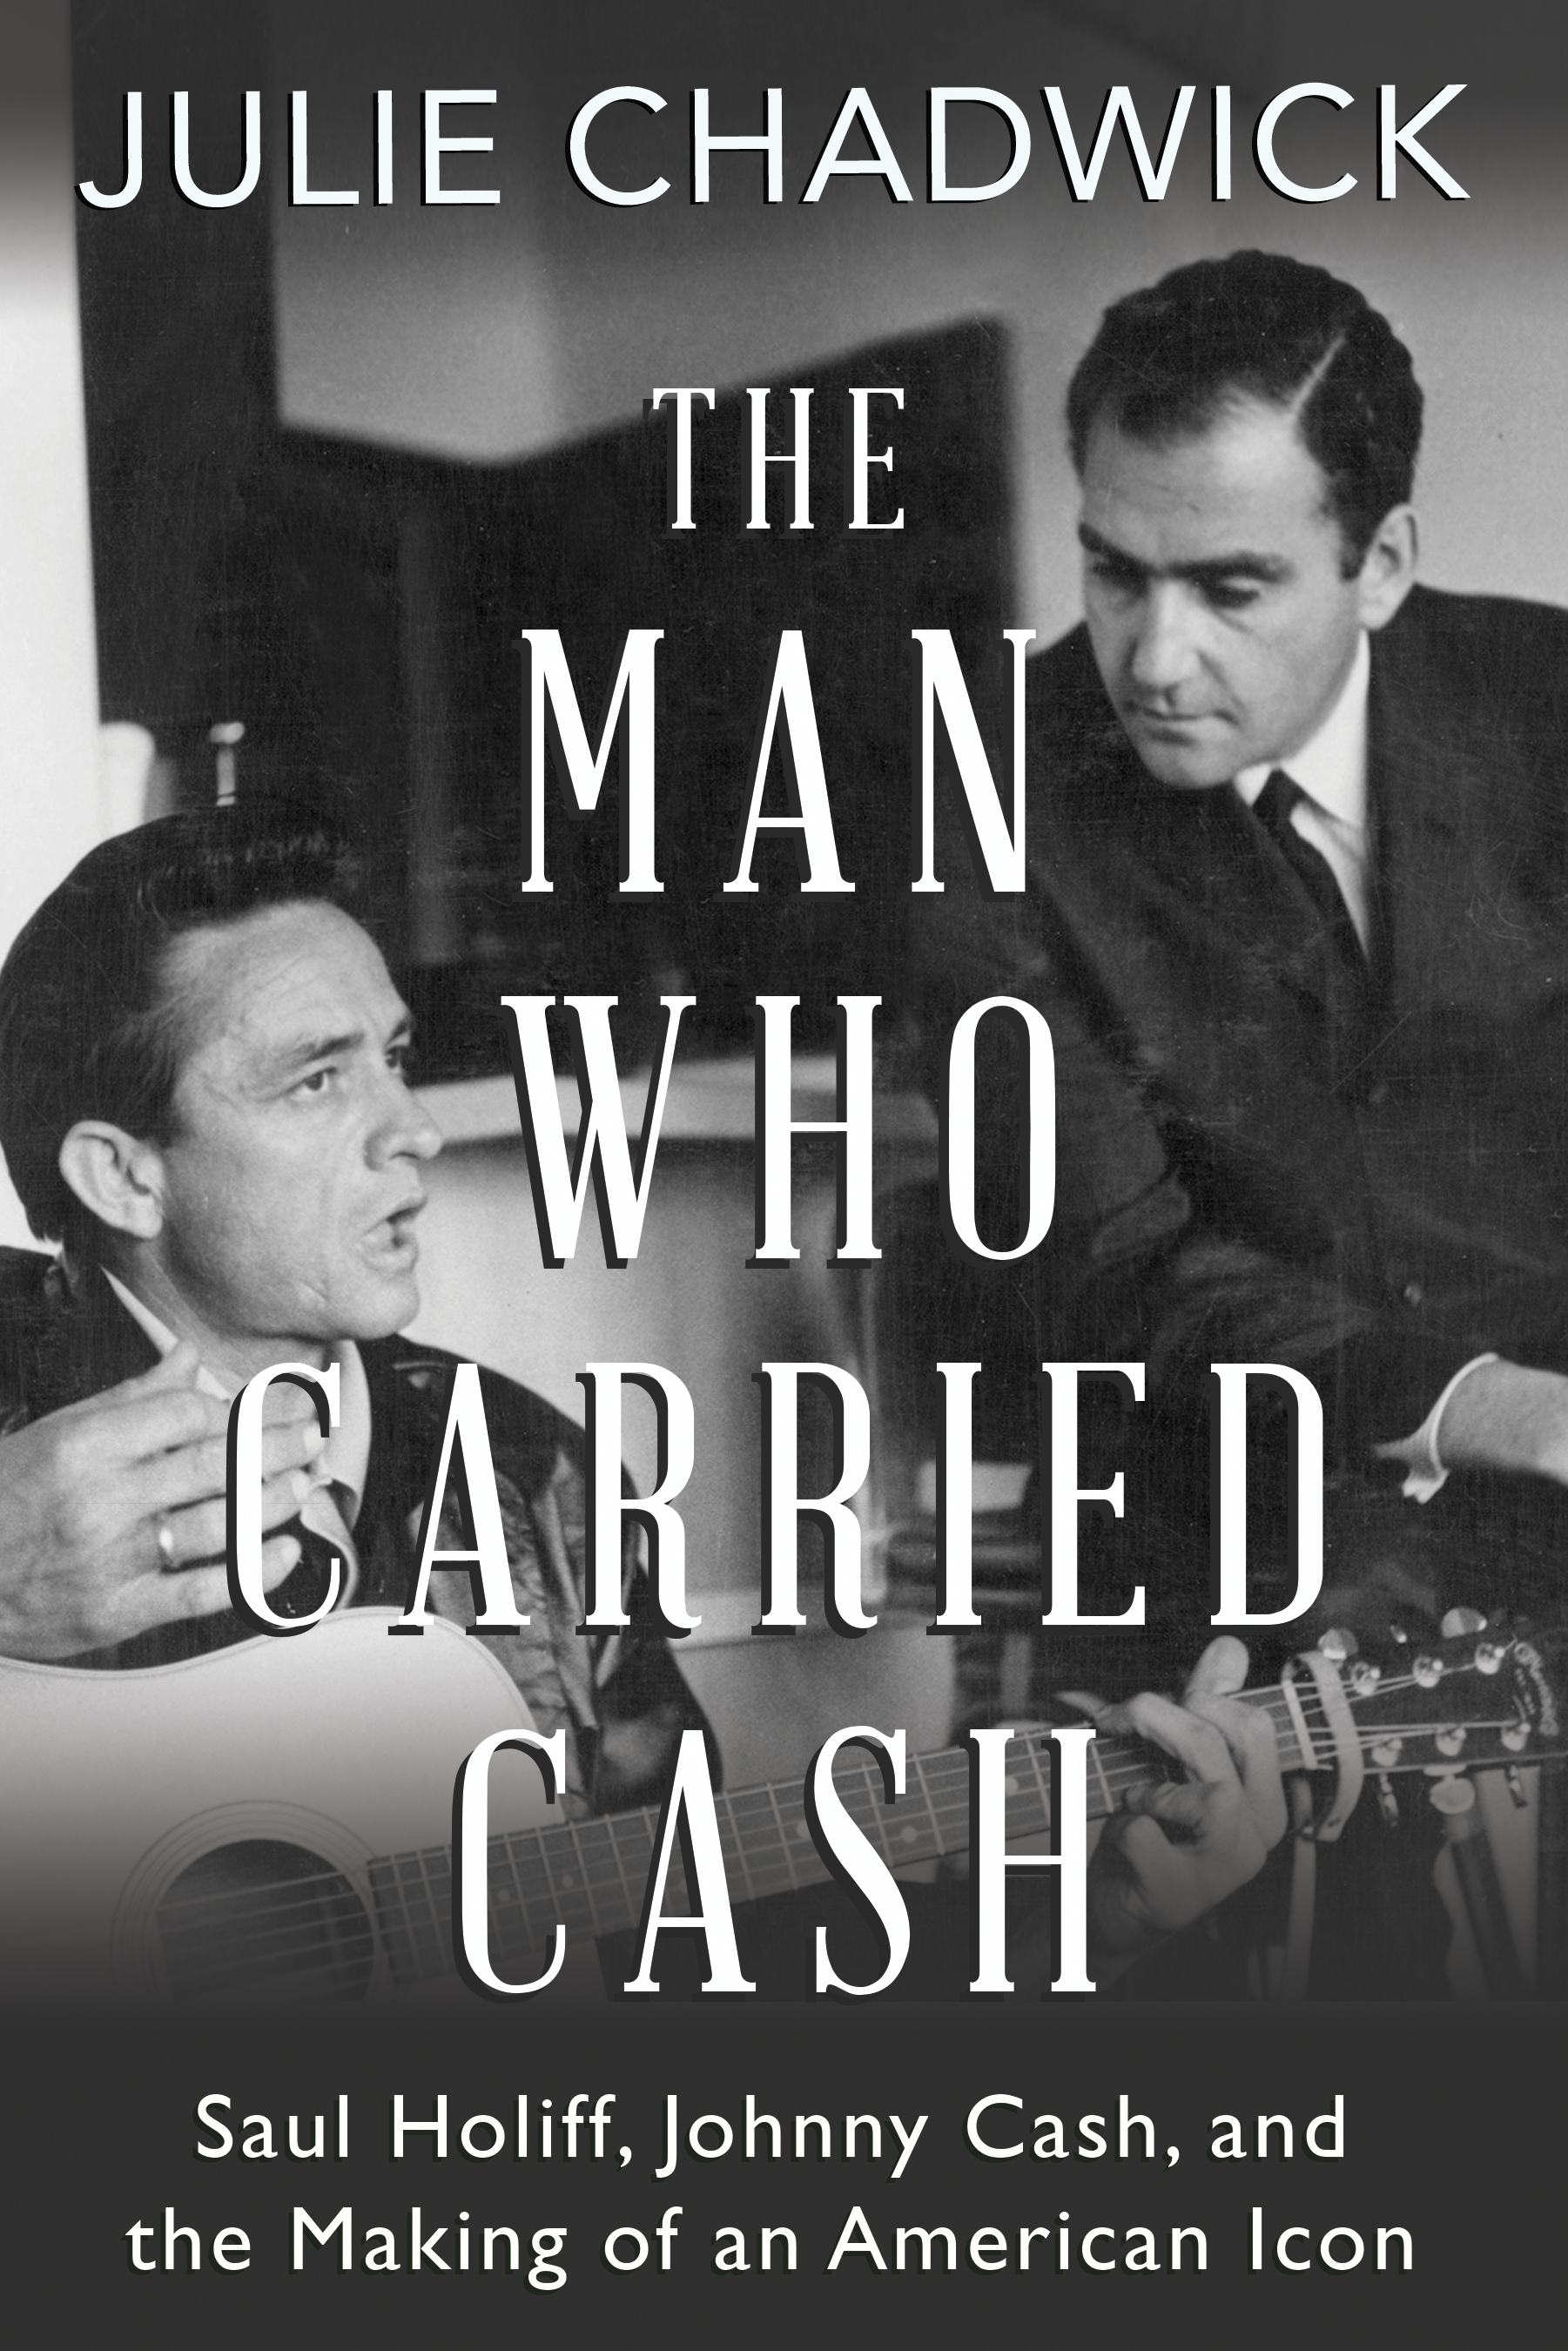 It WAS 50 YEARS AGO TODAY THAT JOHNNY CASH TAUGHT THE WORLD HOW TO SLAY